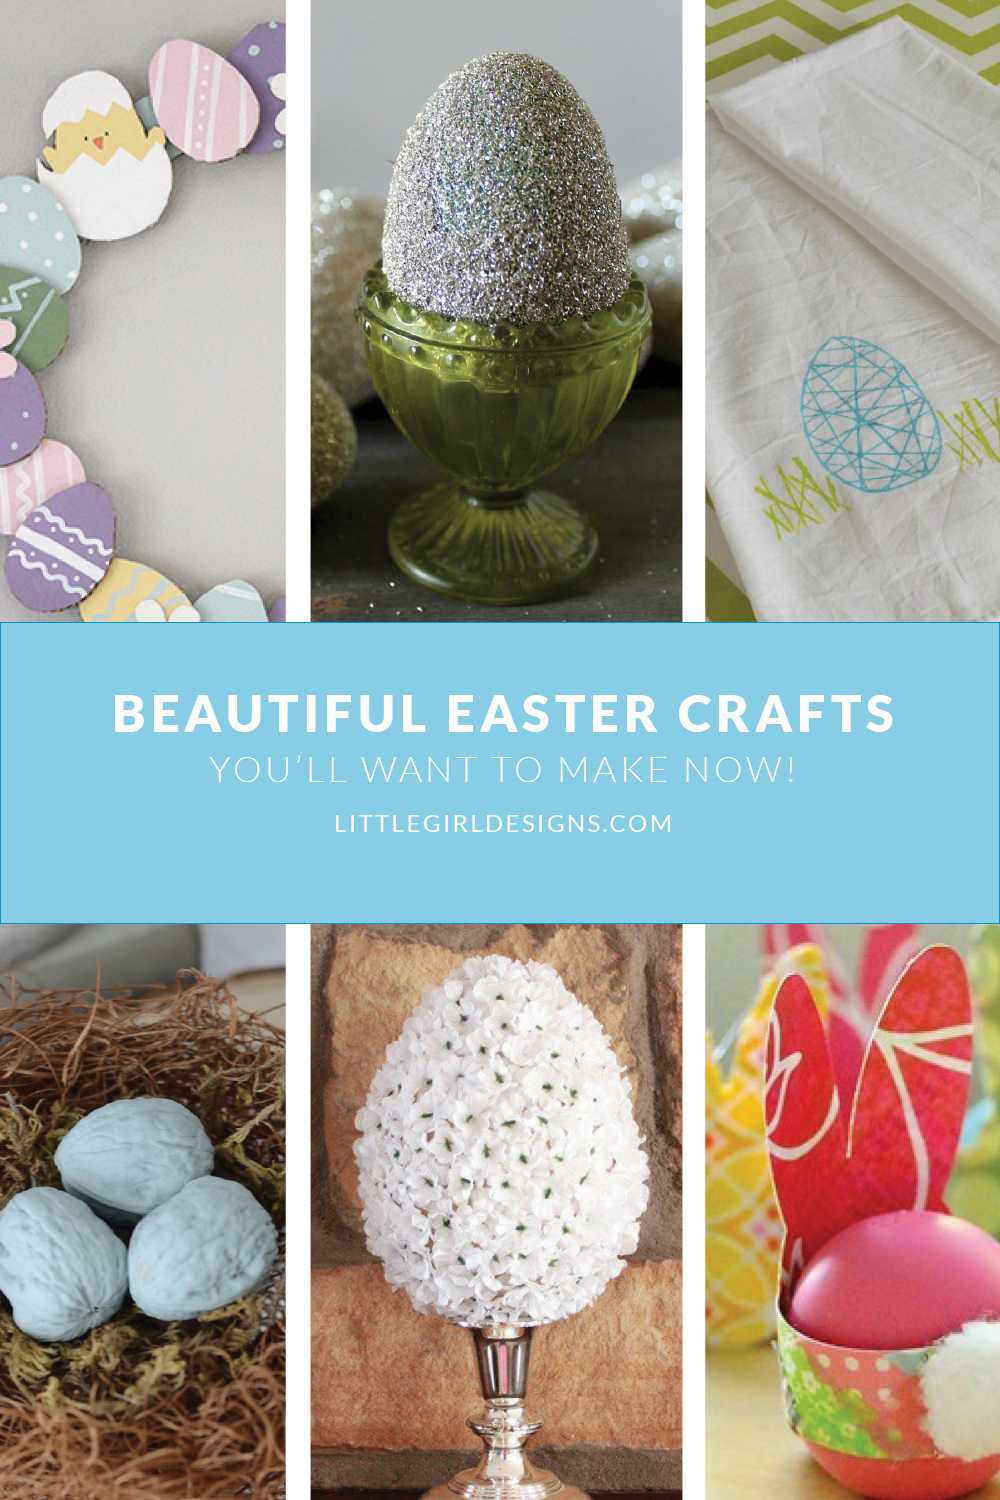 My favorite beautiful {and simple} Easter crafts that you'll want to make today! @littlegirldesigns.com